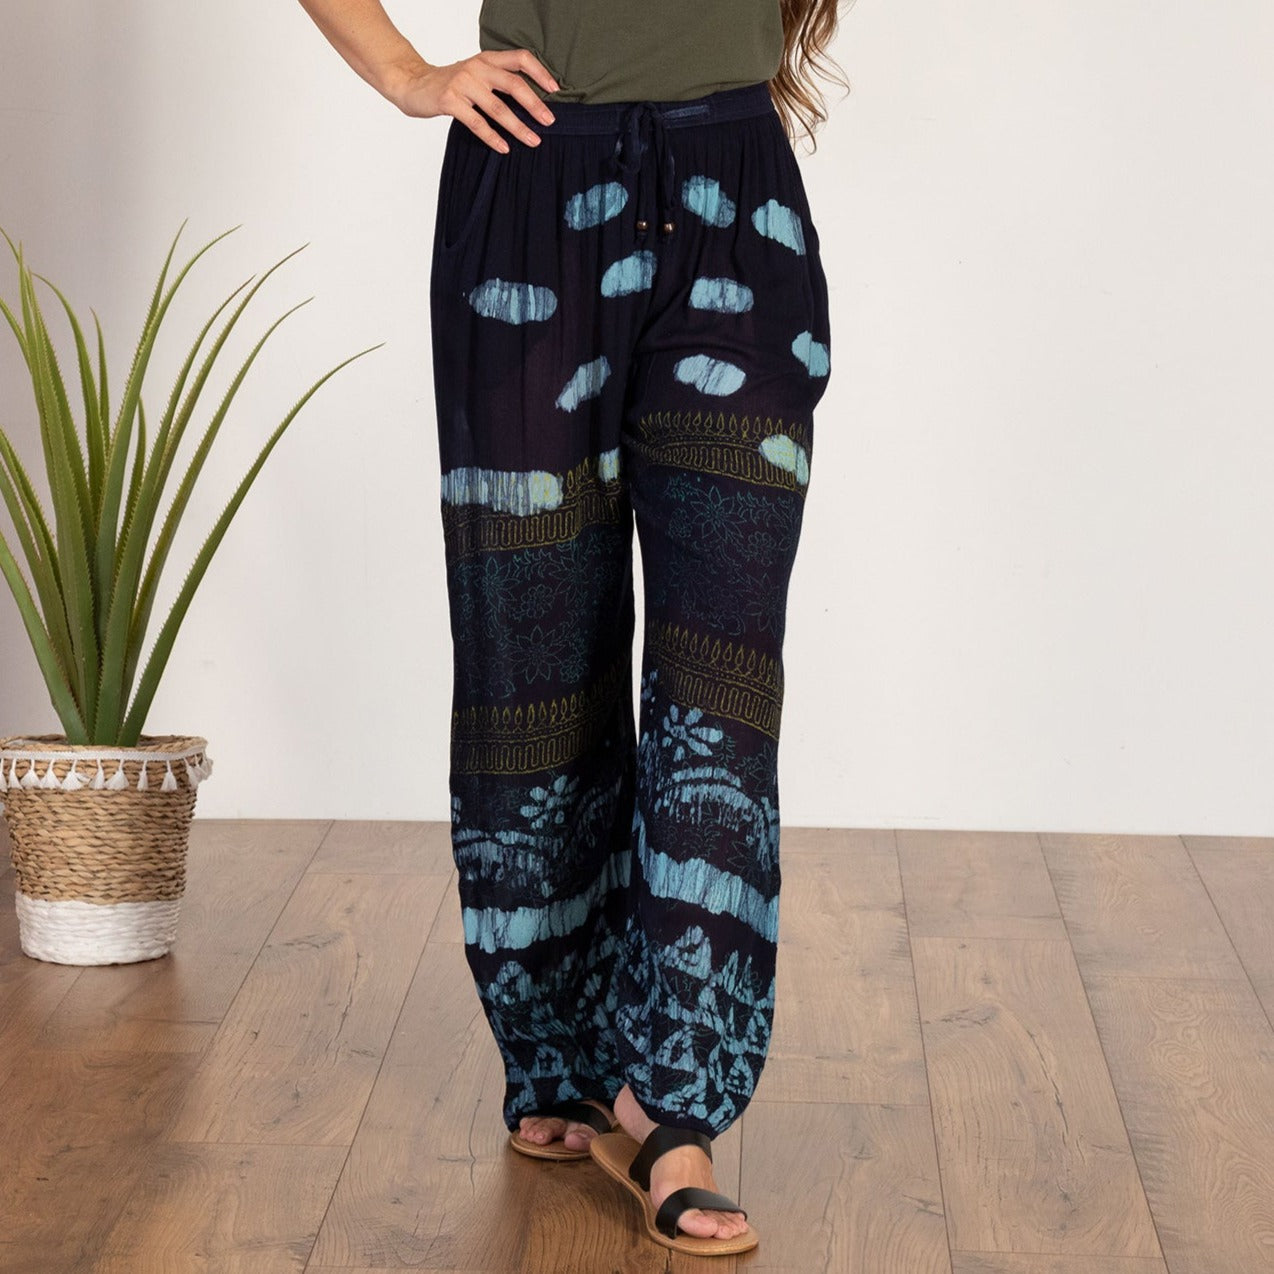 Women's Made To Move Casual Palazzo Pants & Top Set - Pants - Black & Blue - S/M